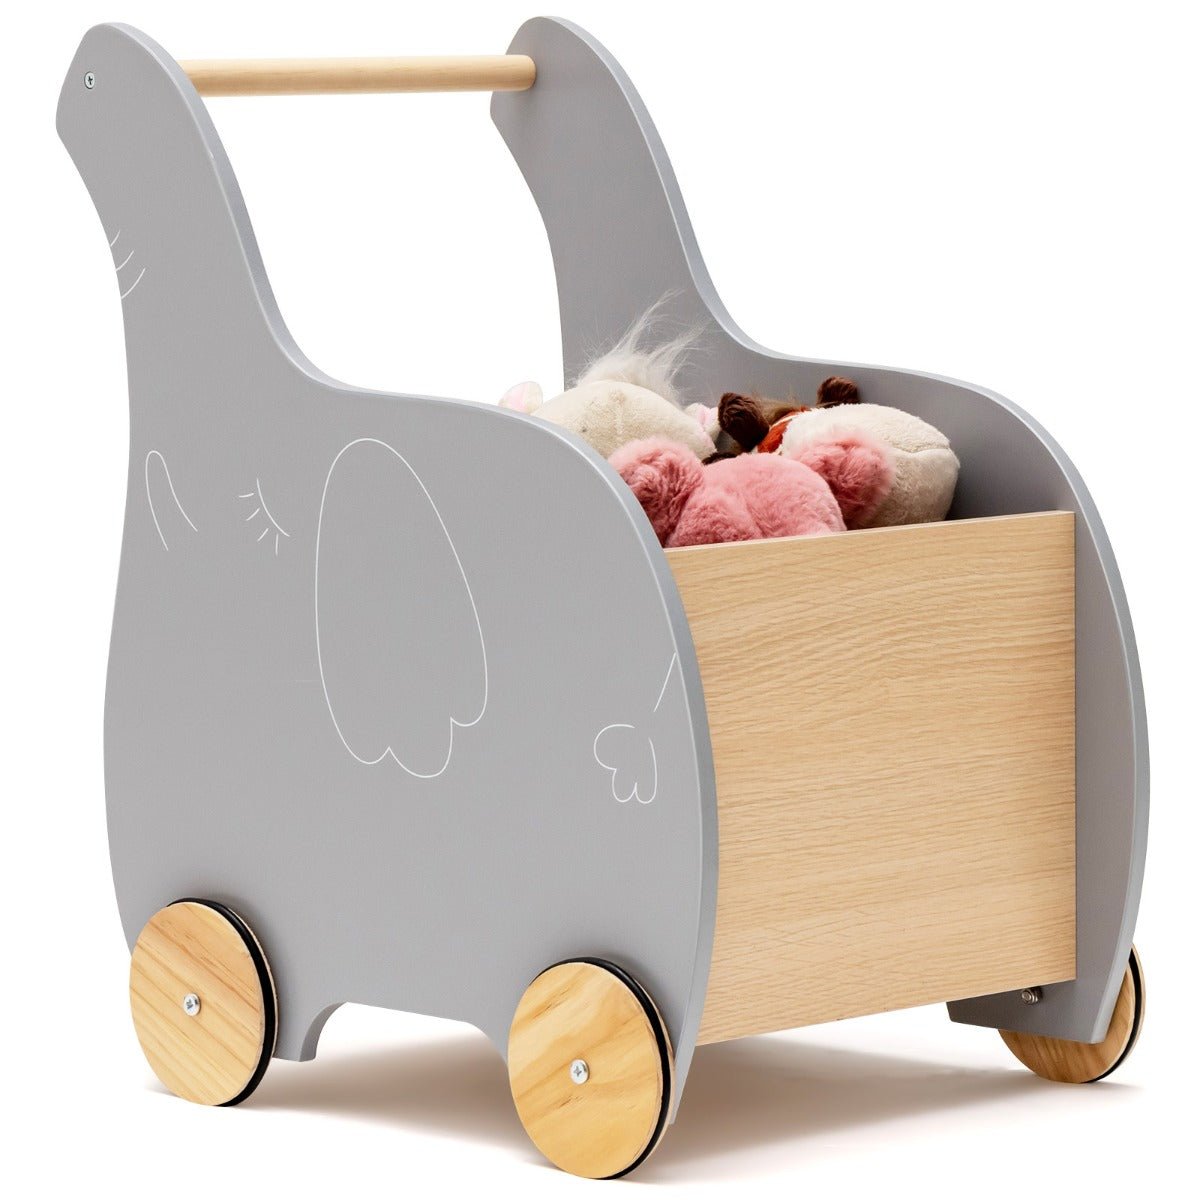 Wooden Kids Shopping Cart - Rubber Wheels, Role-Play Shopping Delight